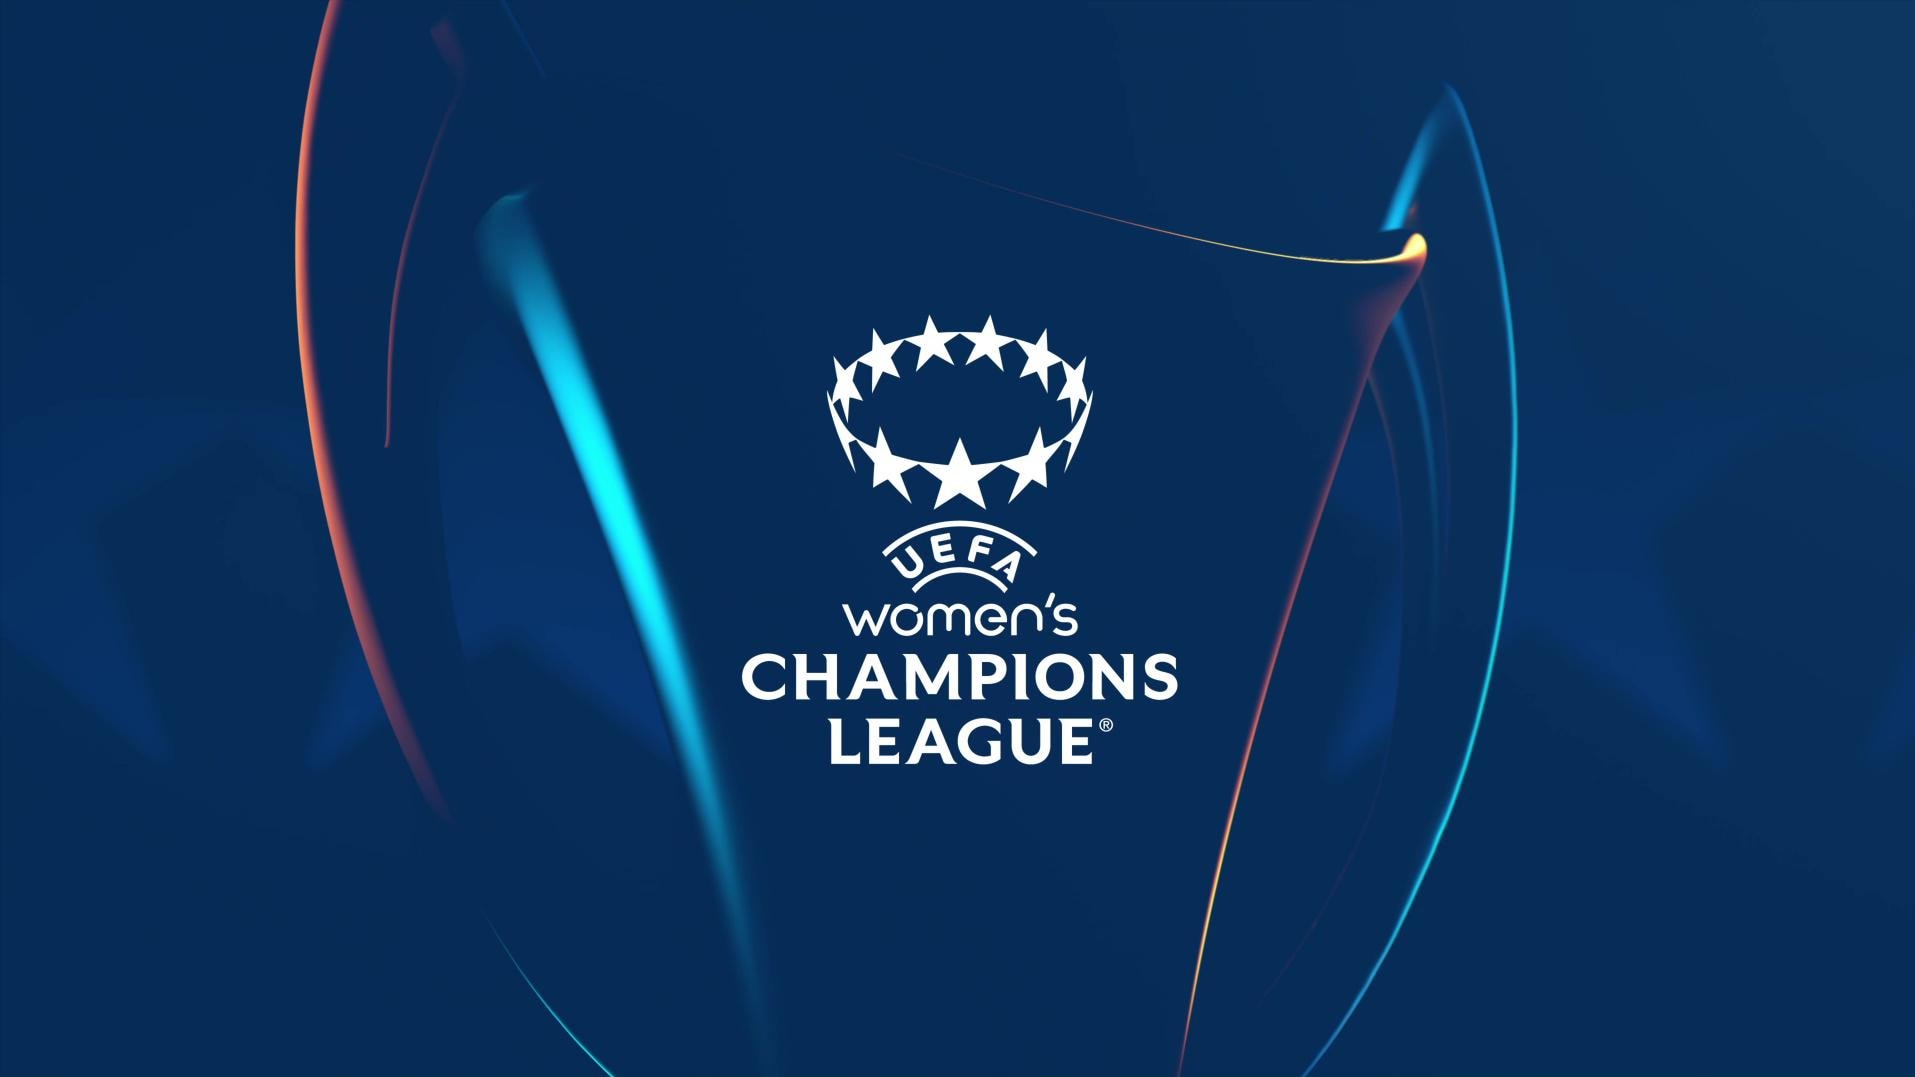 UEFA opens up Women’s Champions League to world with game changing DAZN